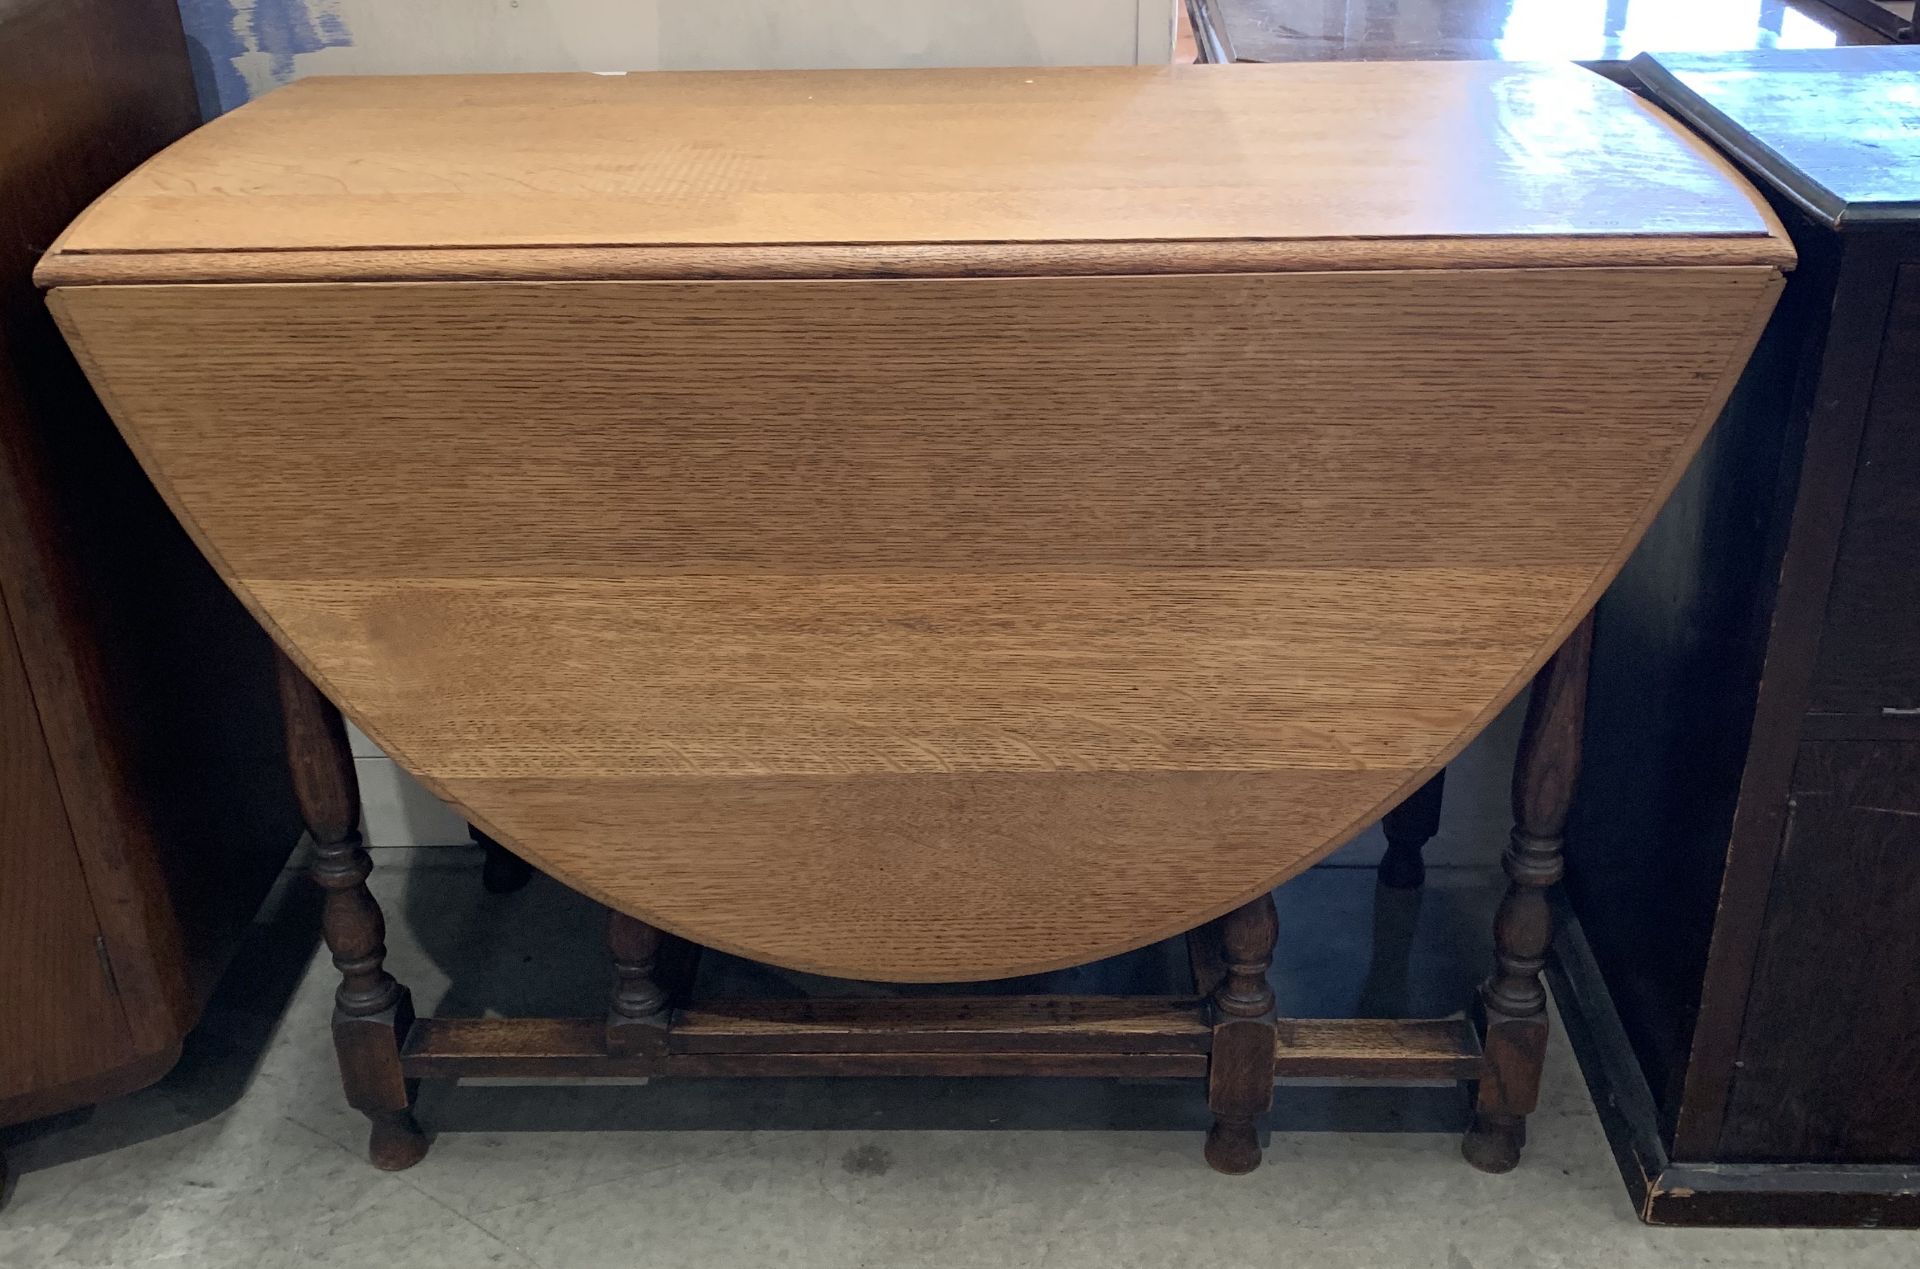 An oak oval drop leaf dining table 108 x 160cm when extended - stamped to wood underside Waring and